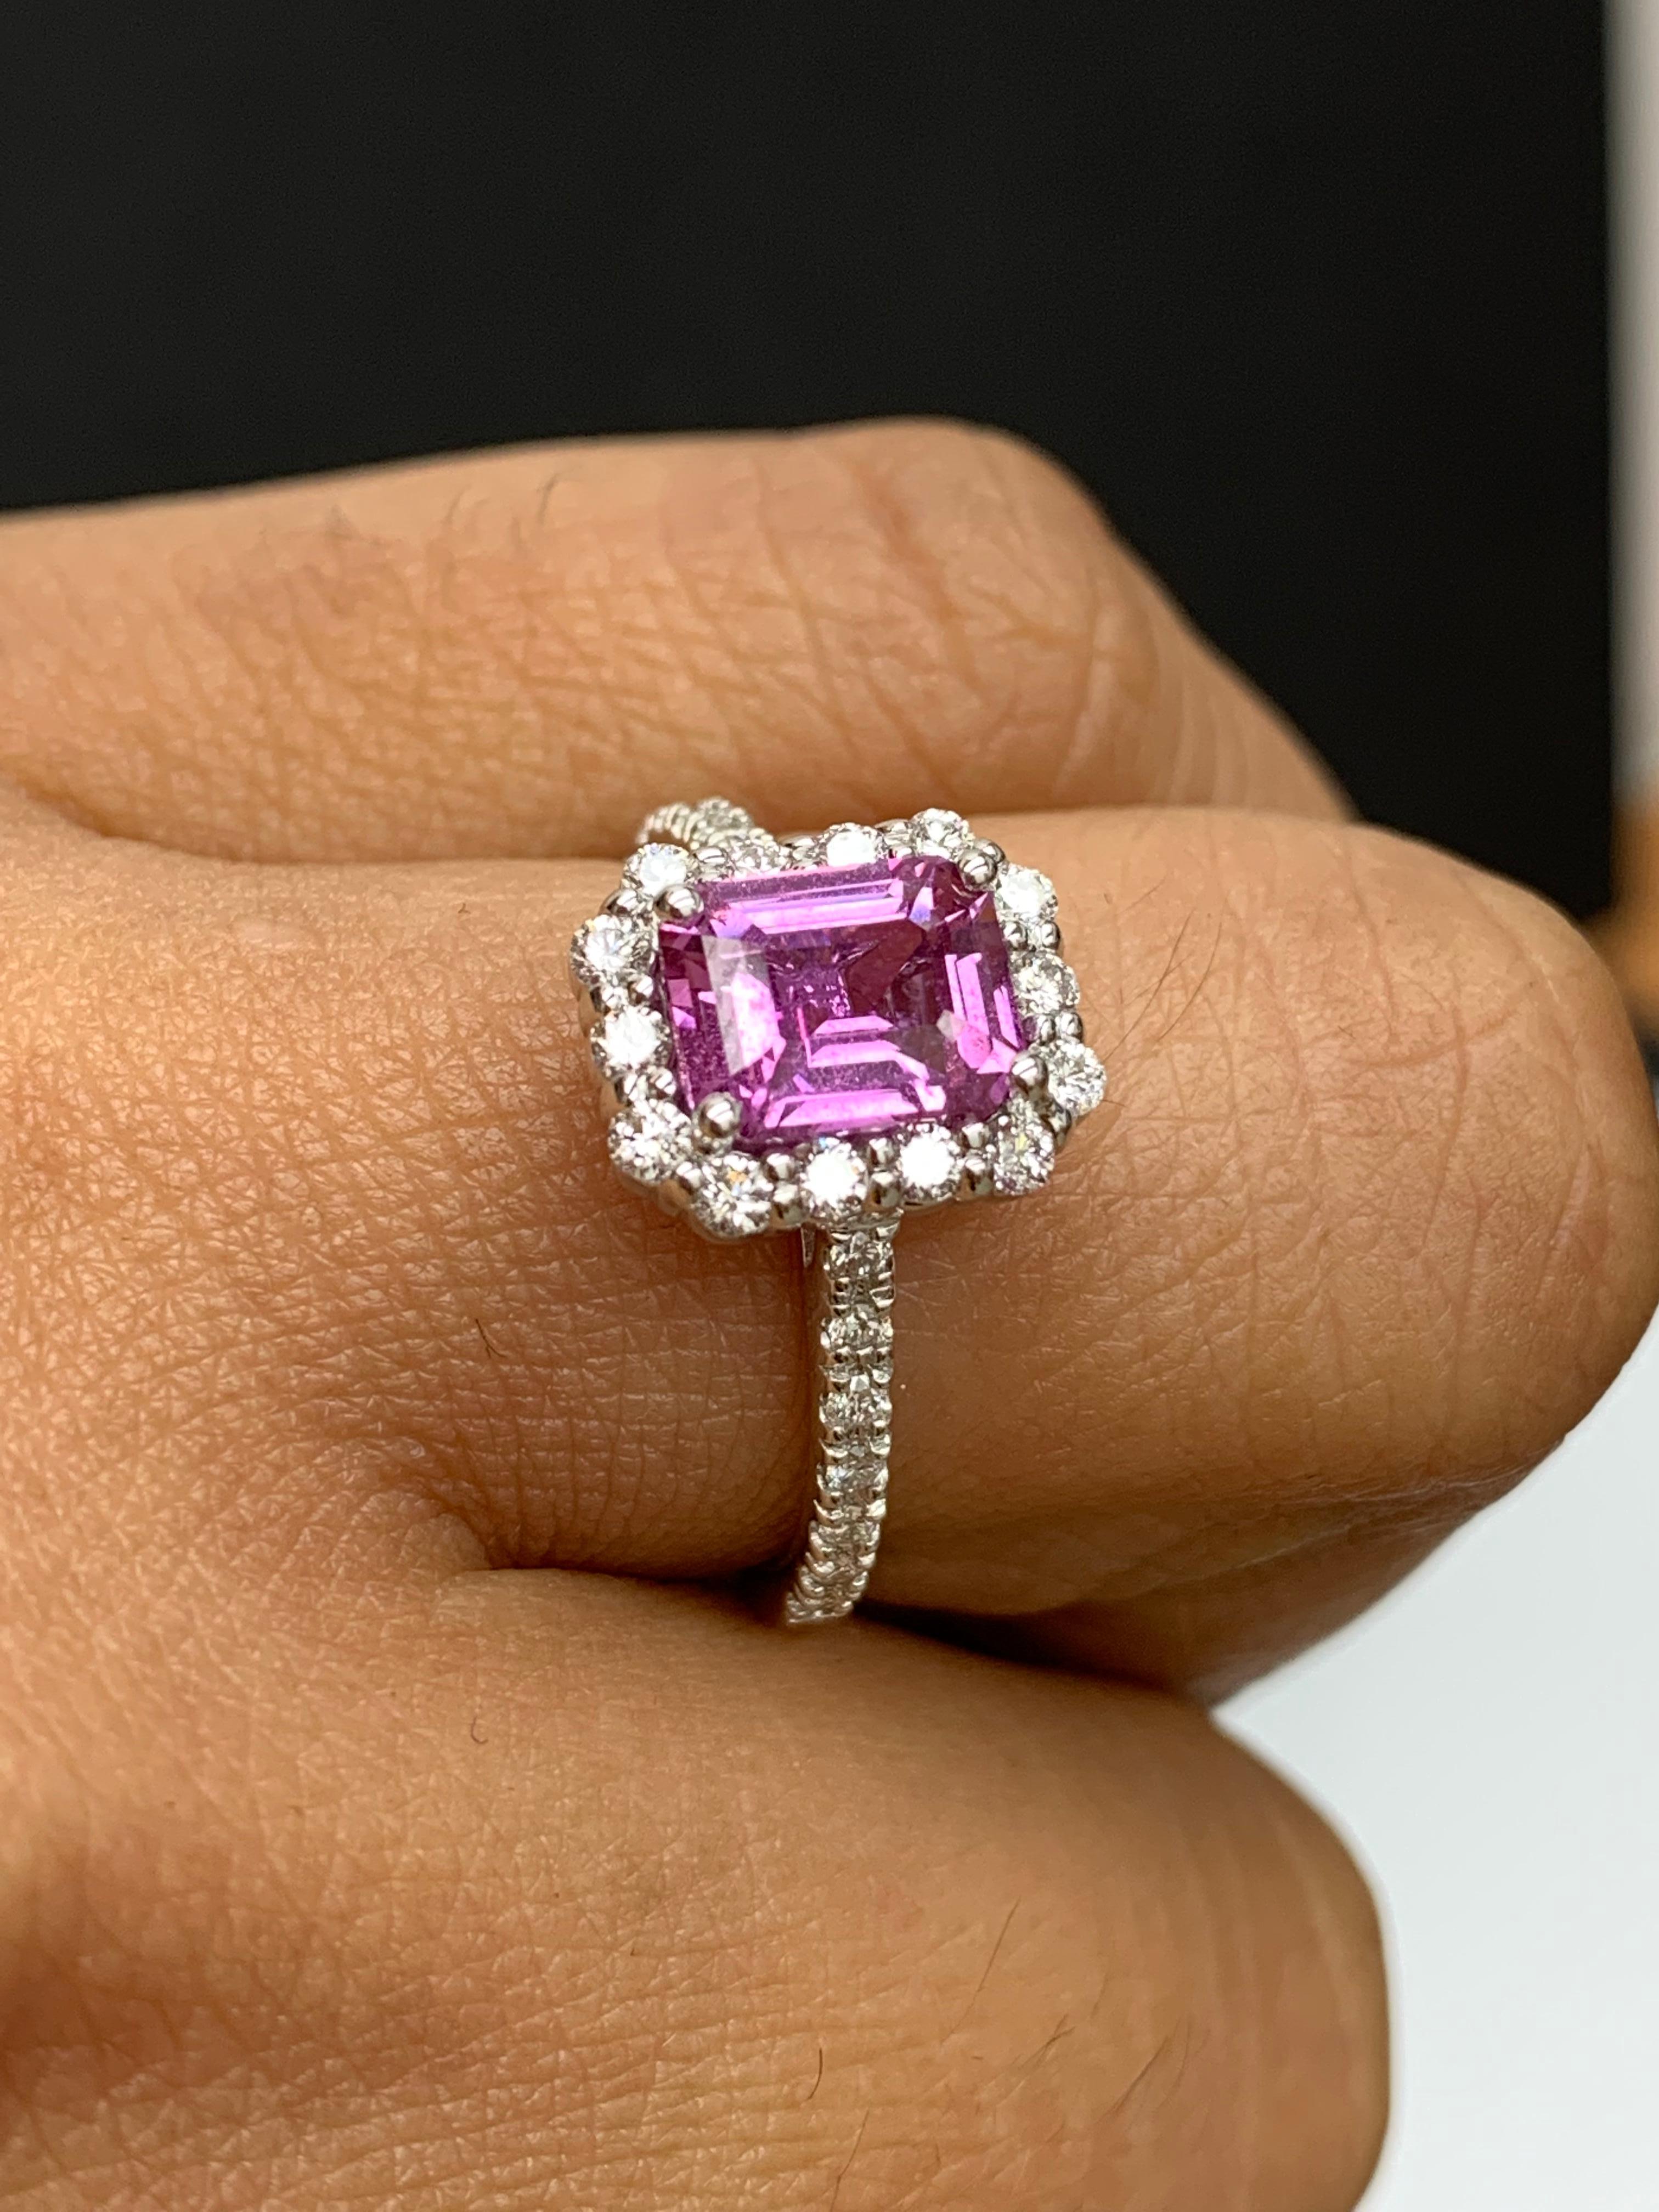 1.59 Carat Emerald Cut Pink Sapphire Diamond Engagement Ring in 14K White Gold For Sale 2